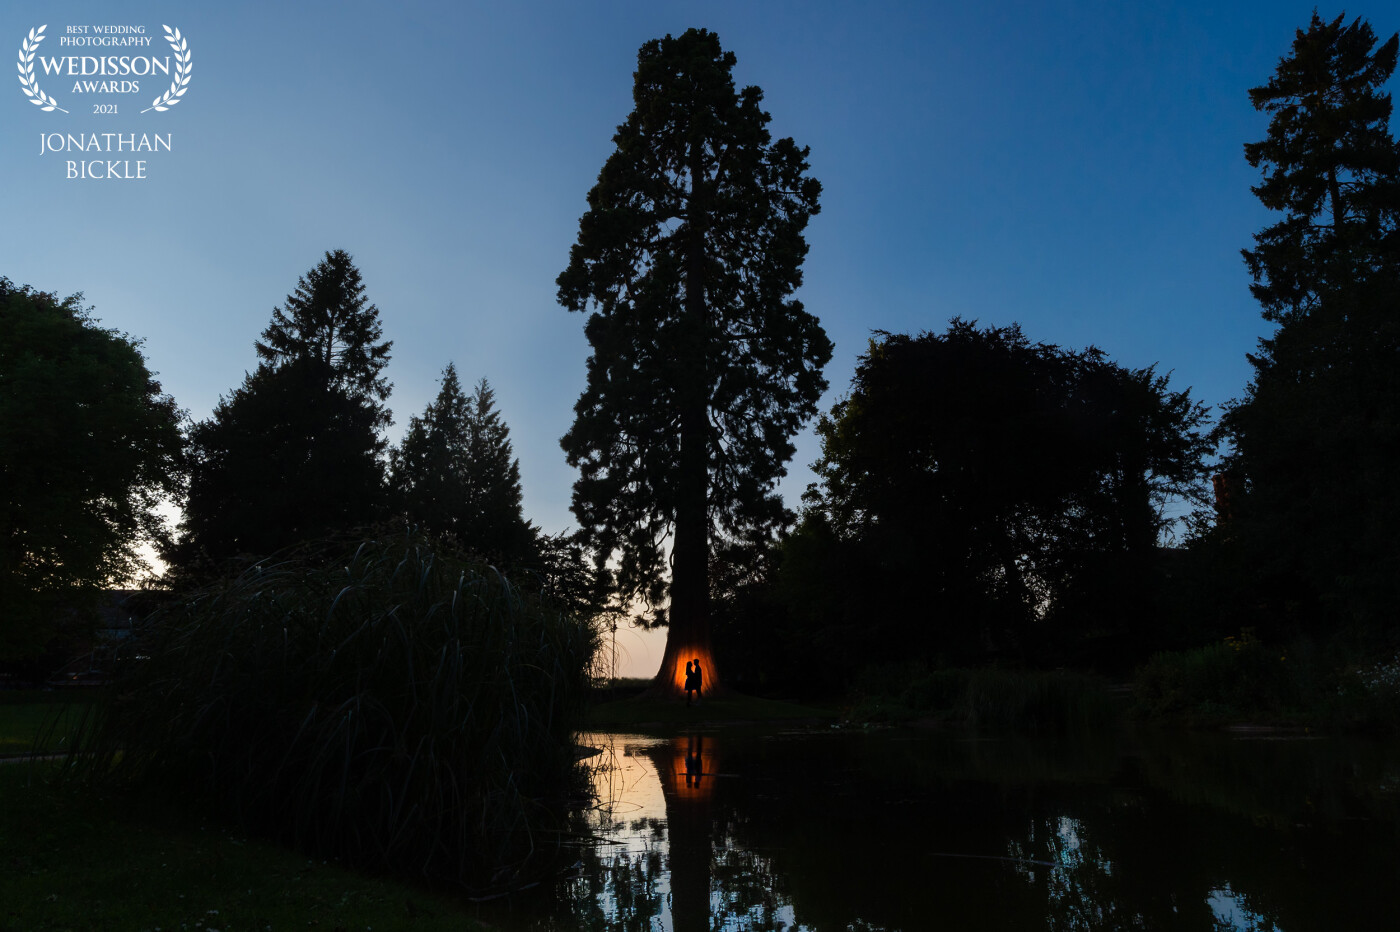 I captured this portrait during an engagement shoot in Tring. I saw the opportunity to get a reflection in the pond but the natural light wasn’t great so I used flash behind the couple to make the circle of light and under exposure the scene.